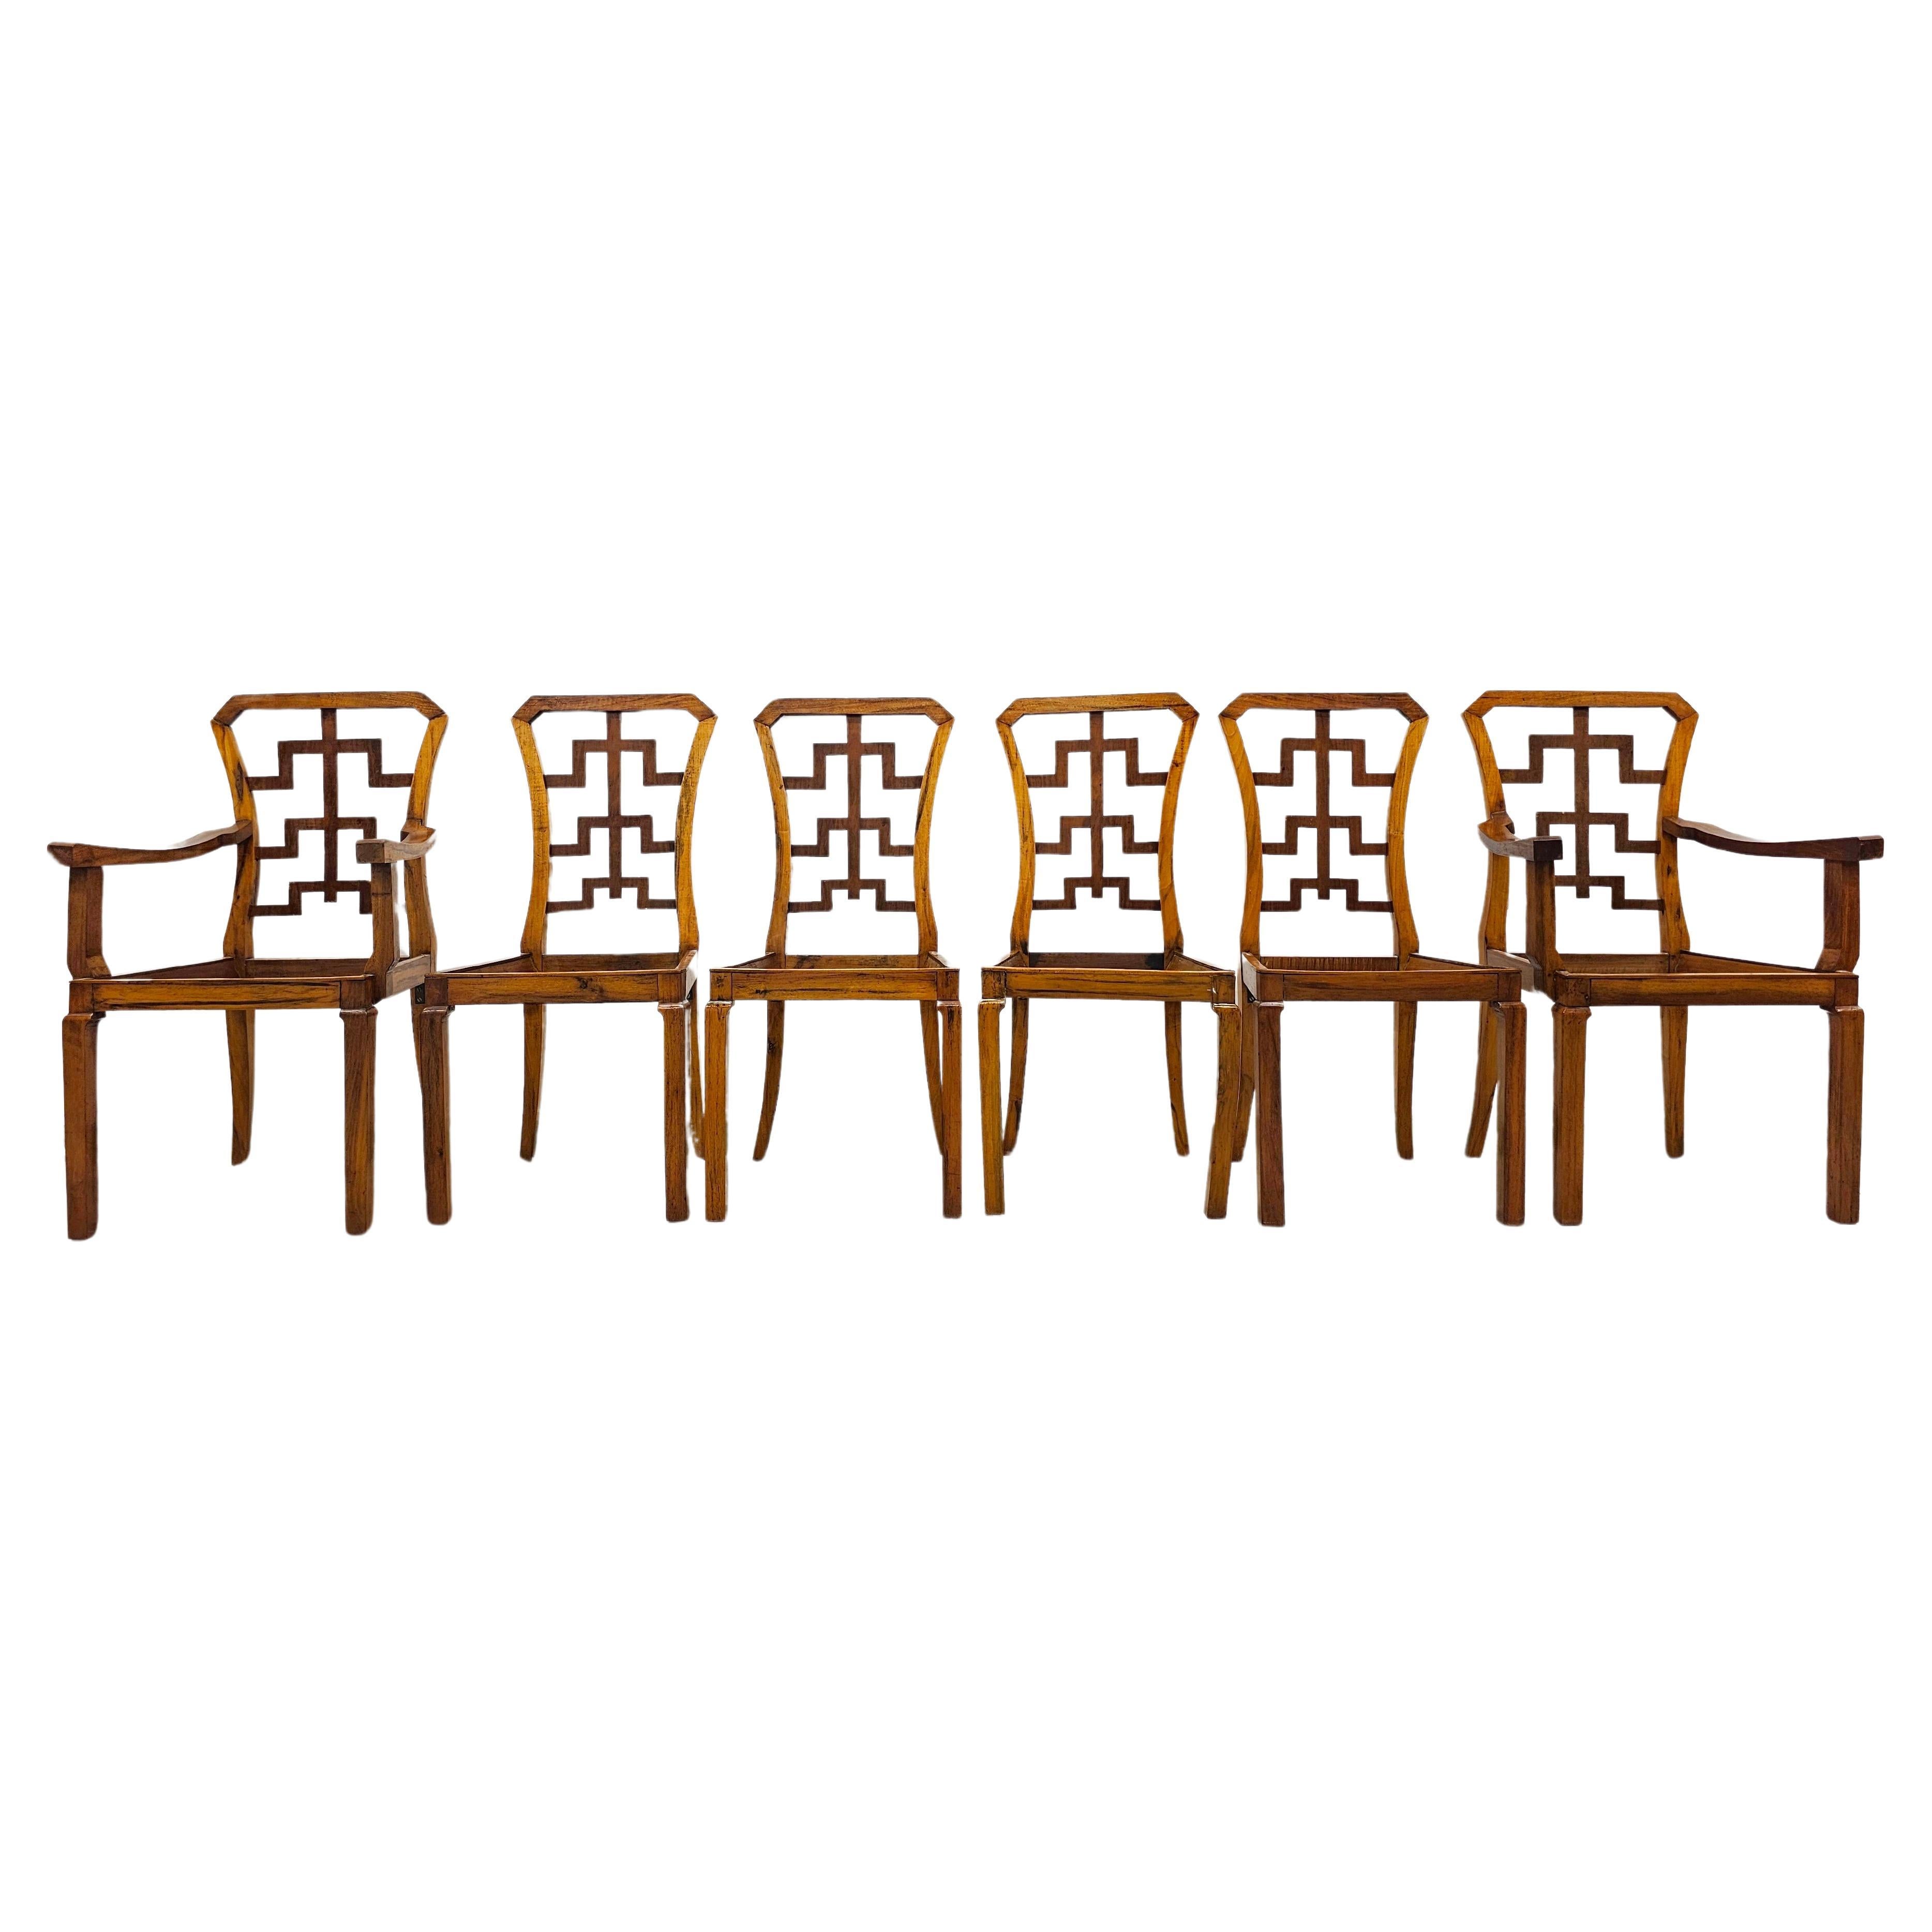 Set of 6 Art Deco Dining Chairs in walnut with stunning backrests, Austria 1930s